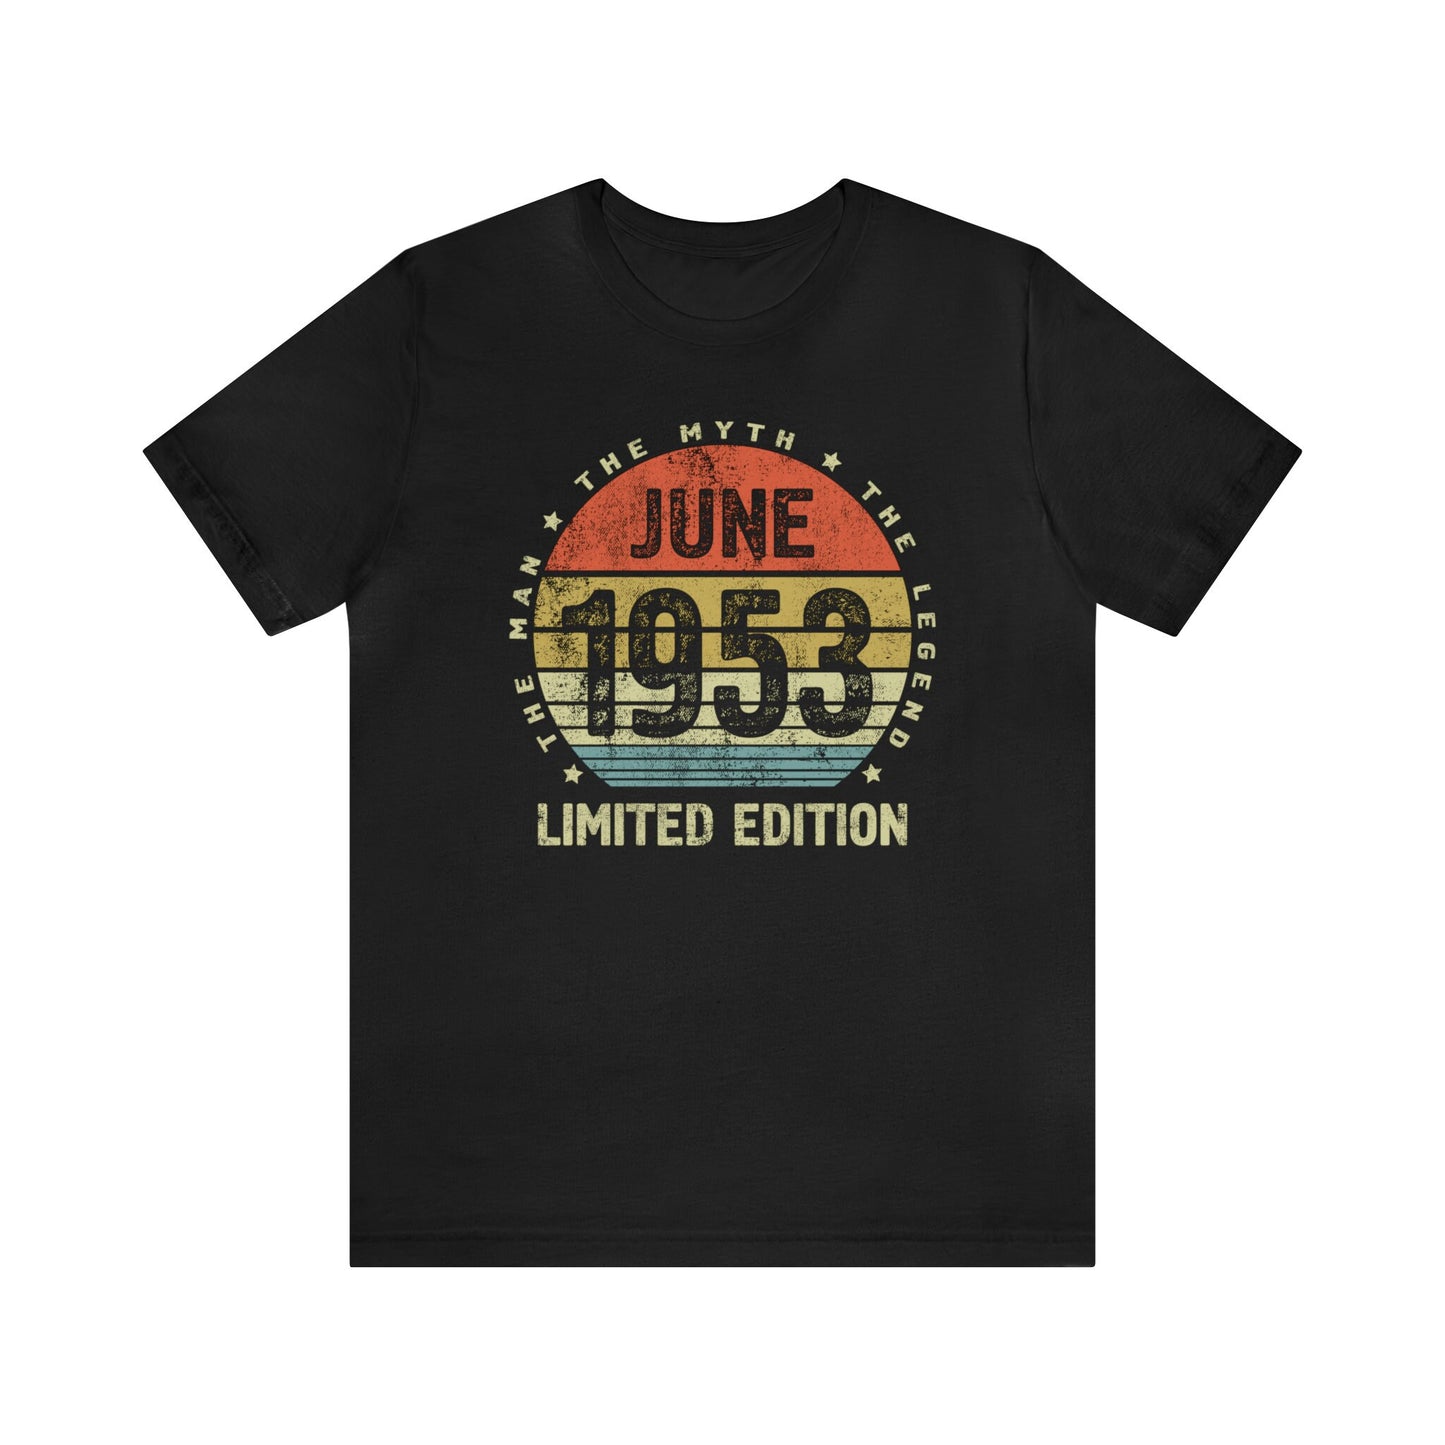 June 1953 birthday shirt for Husband or dad, Born in 1953 gift t-shirt for men